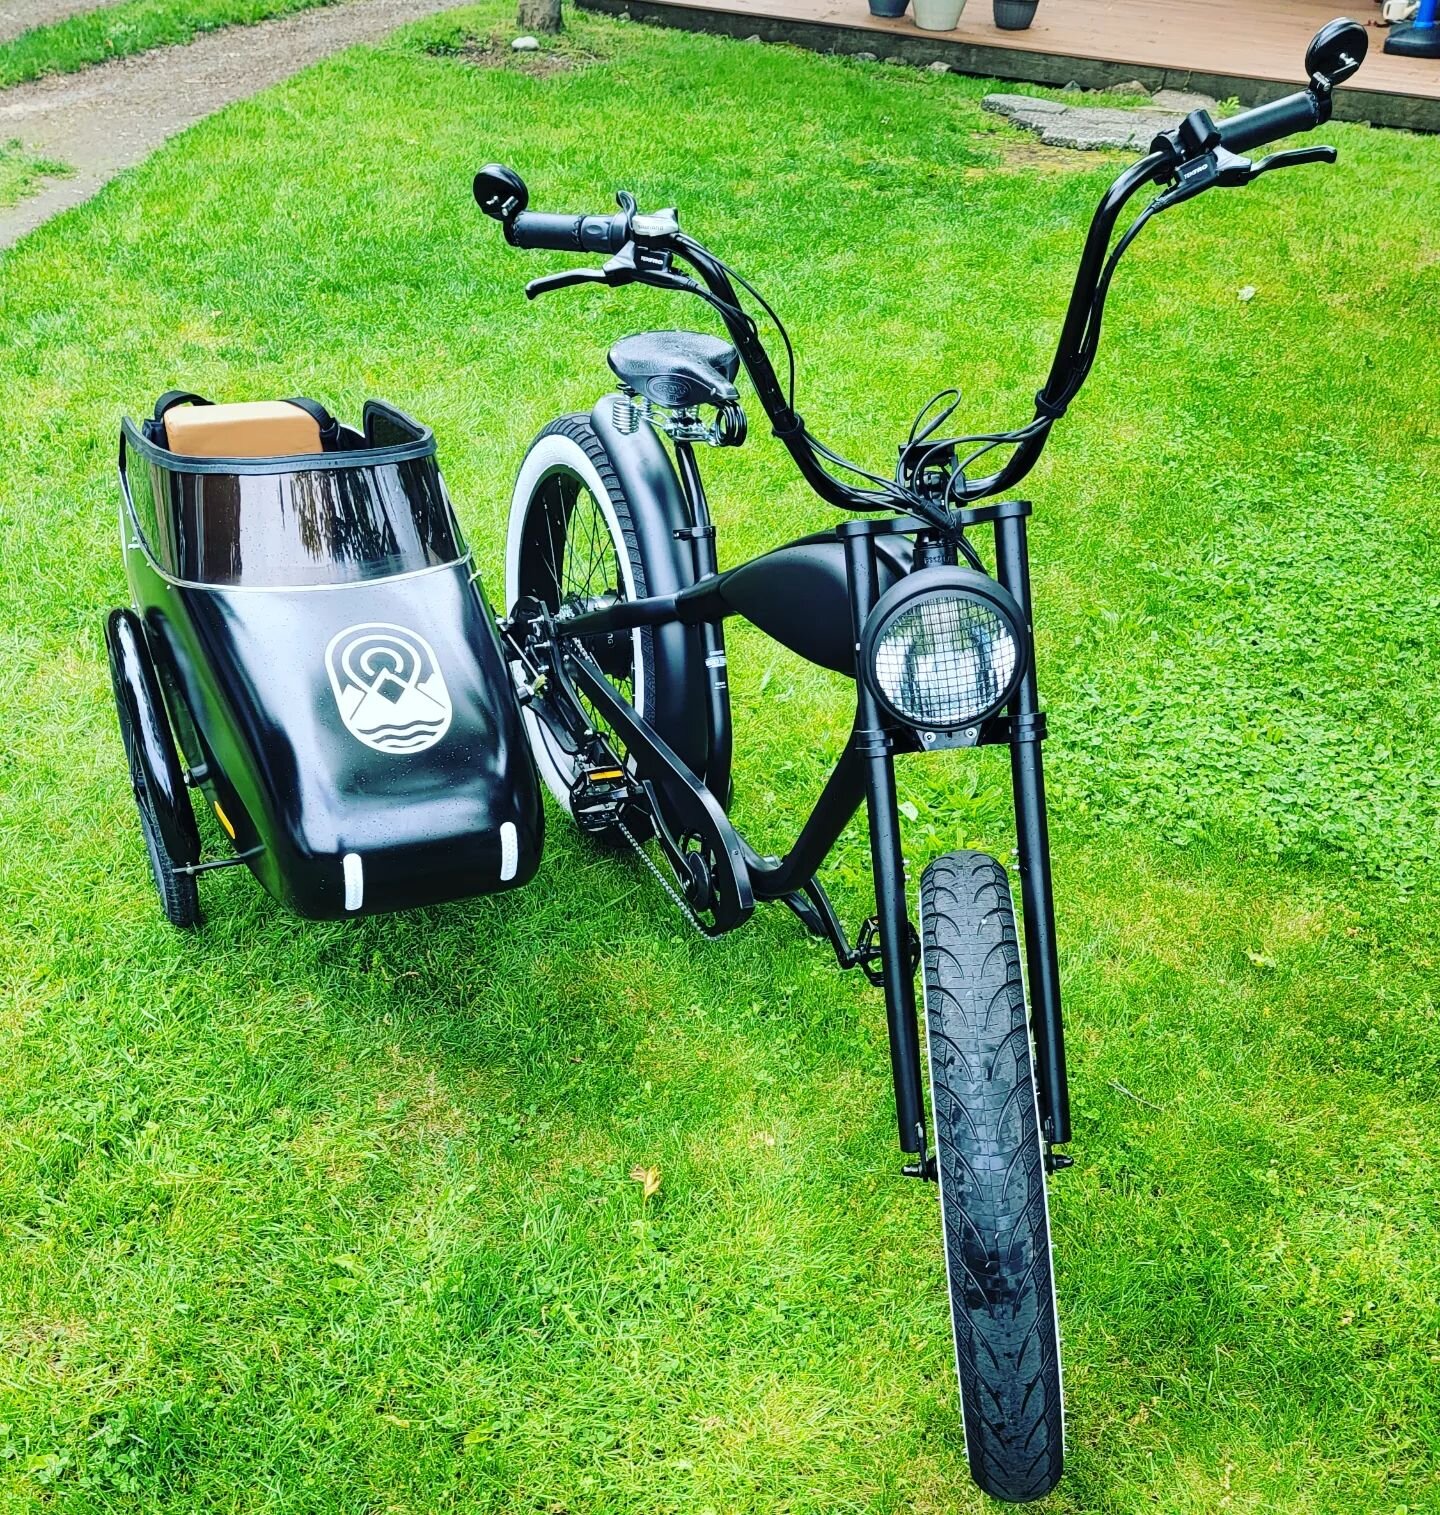 New way to tour inventory with my mini-me. Her one request was a tote to stash snacks 🤯. #wickedthumb #ebikes #sidecars #neighborsnw #andrewneighbors #seattlerealtor #compasswa #compassrealestate #compassrealtor #laurelhurst #bryant #mapleleaf #rave